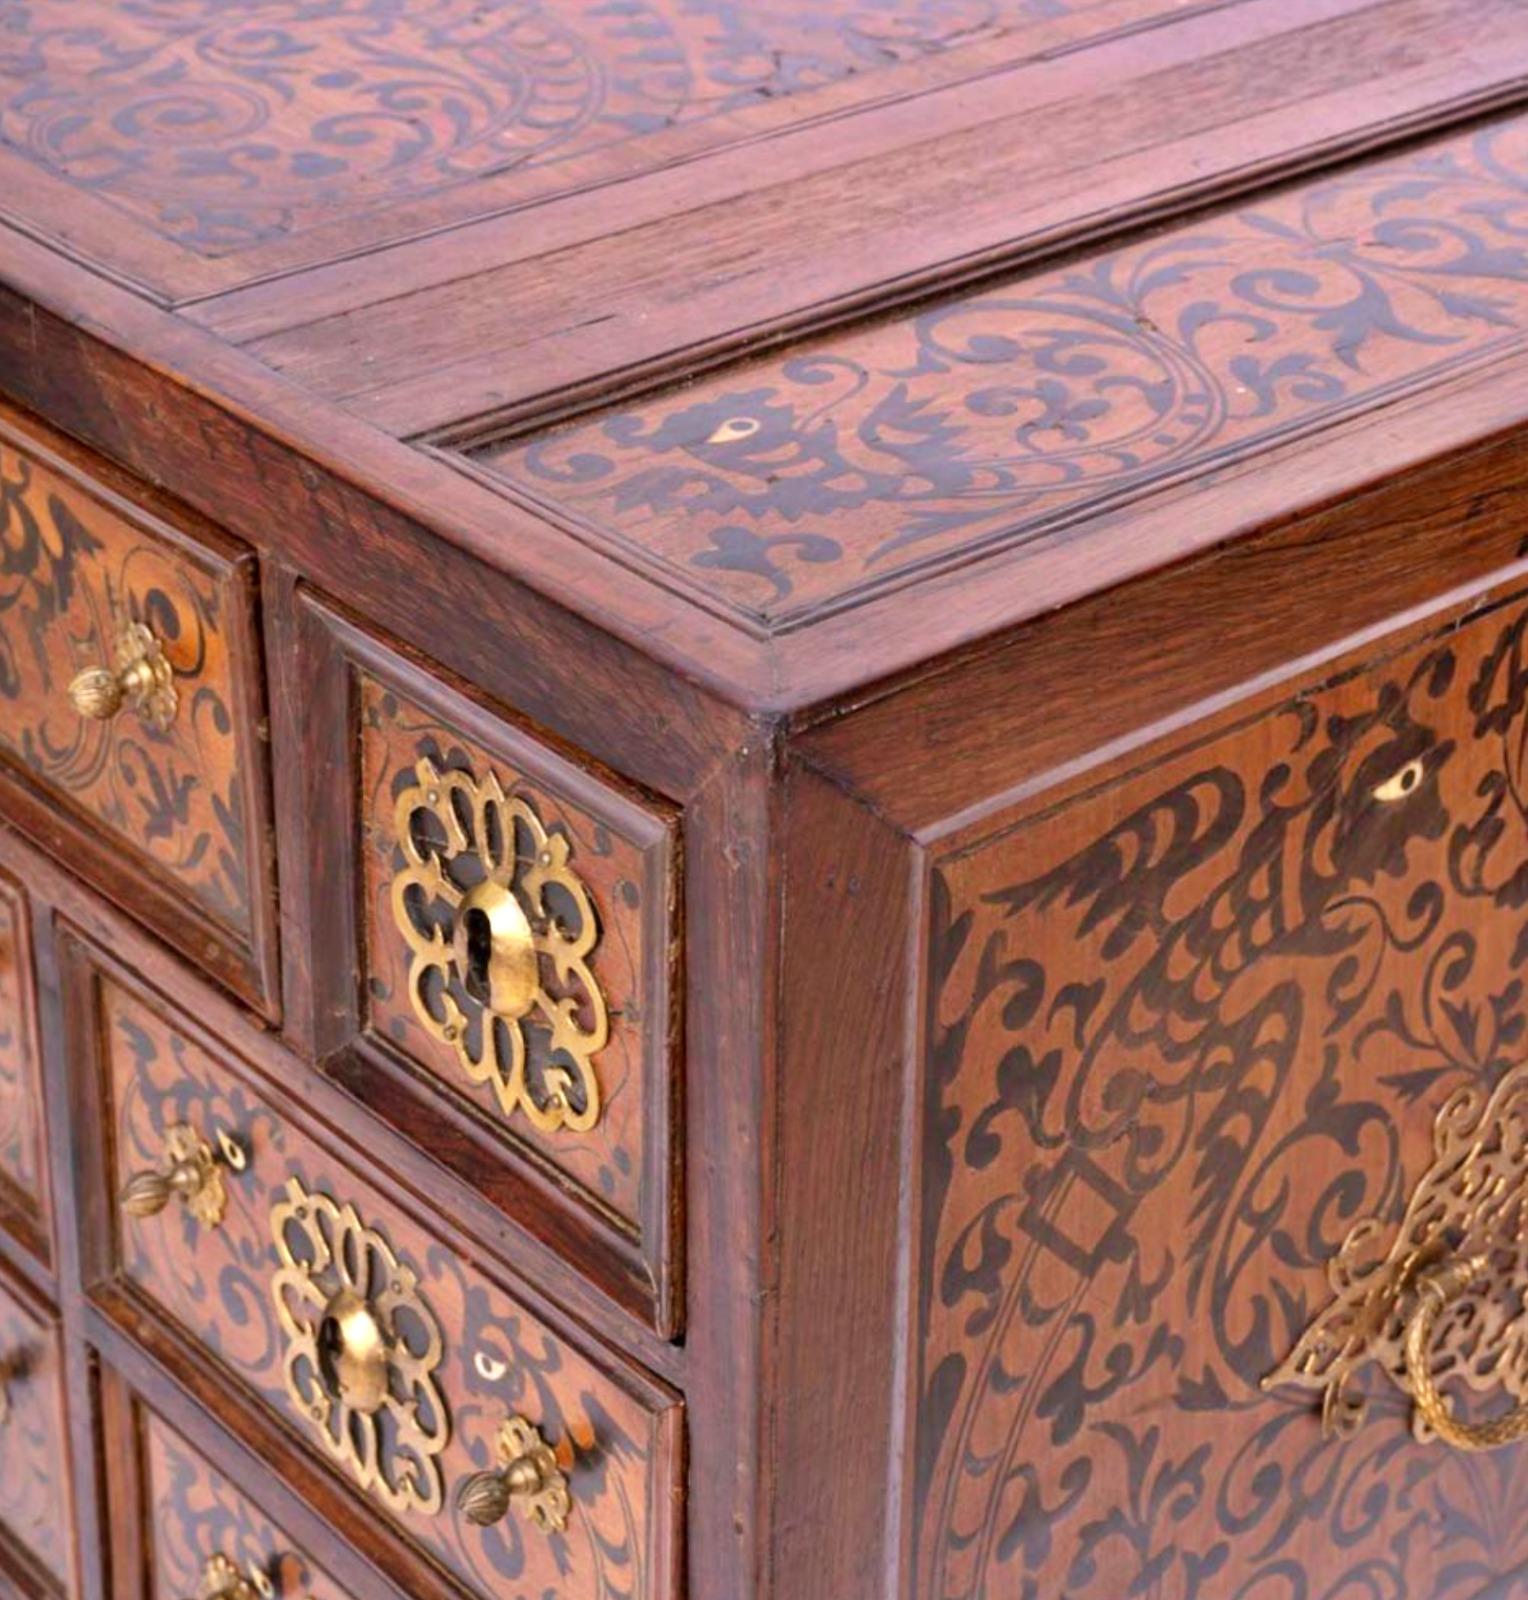 Hand-Crafted Counter with Trimpe Indo-Portuguese, 17th Century